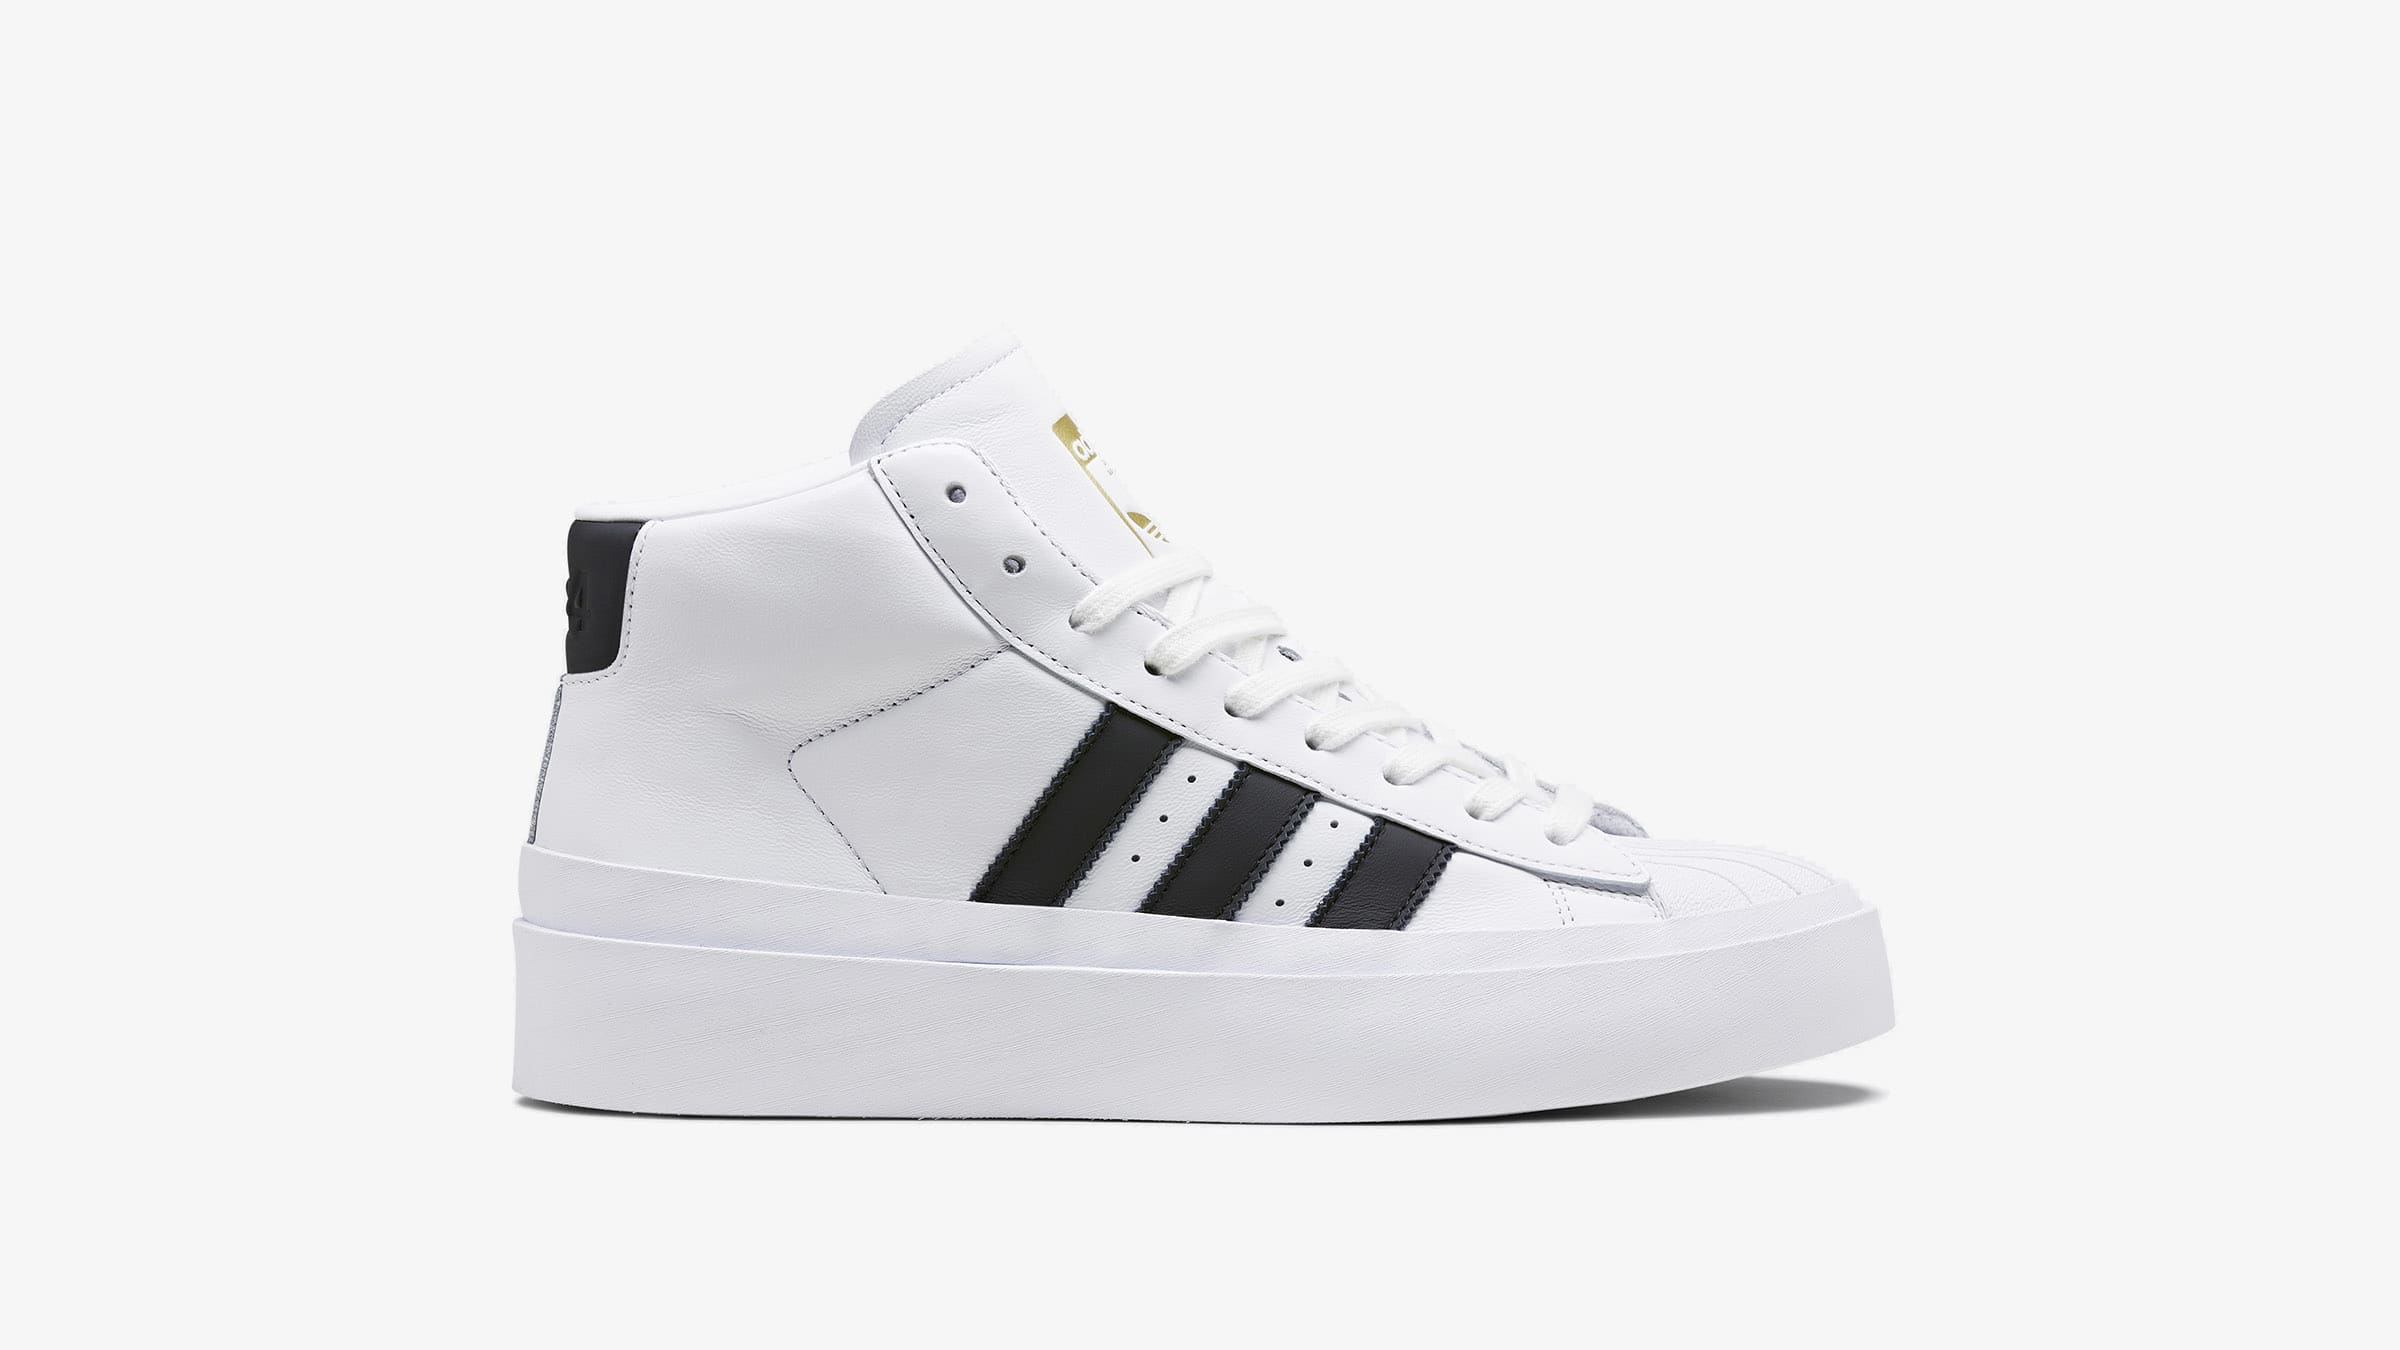 Adidas x 424 Pro Model (White & Black) | END. Launches